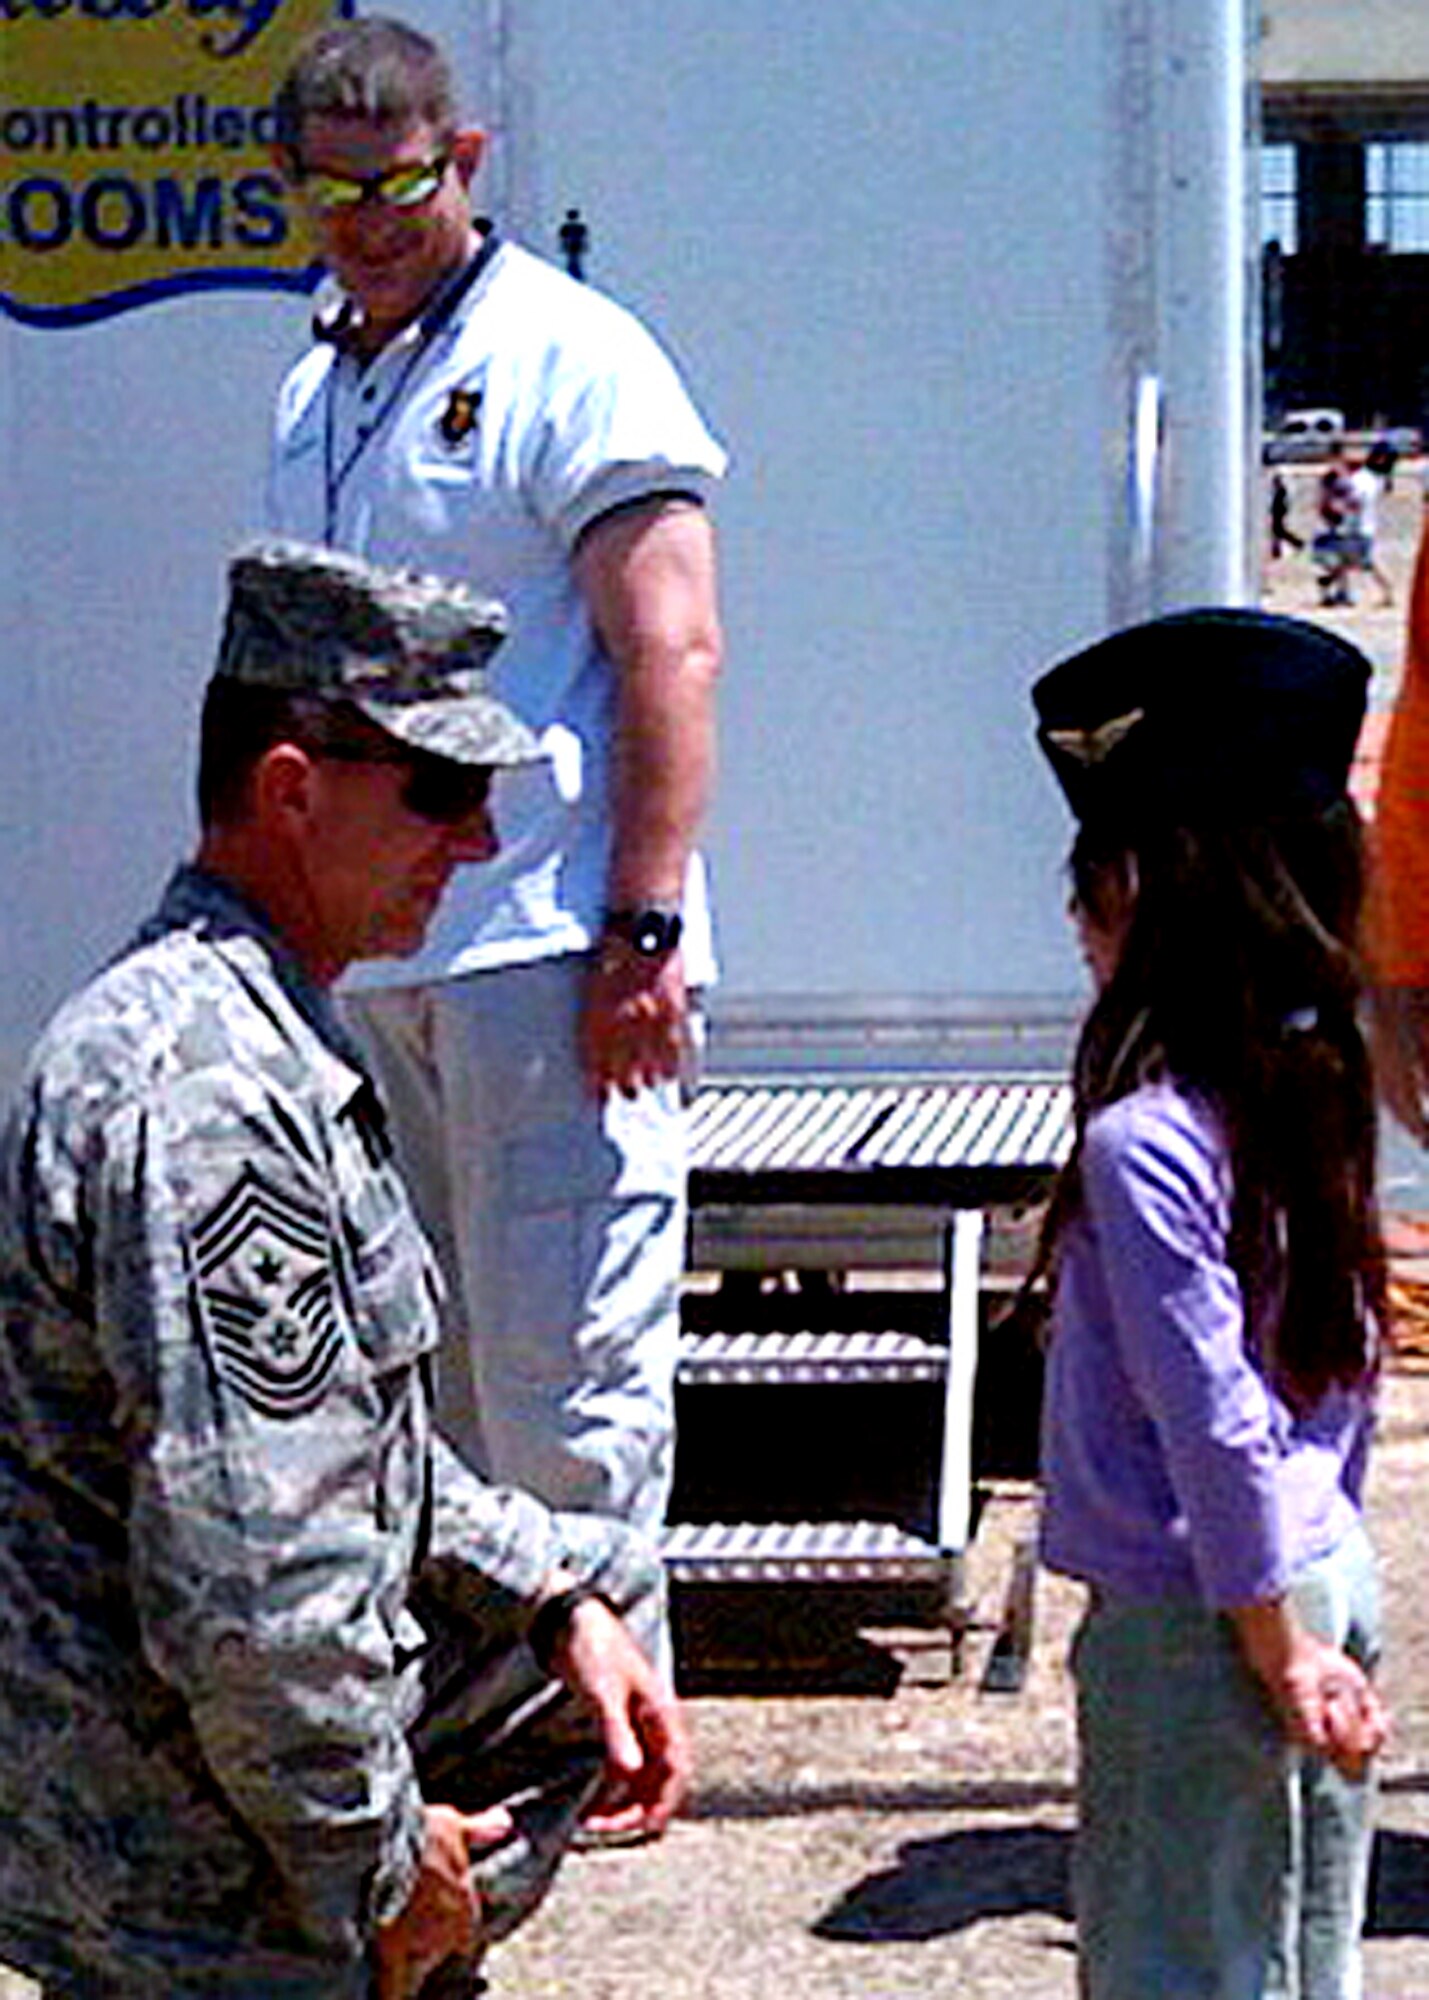 Chief Master Sgt. Thomas Westermeyer, 96th Air Base Wing command chief, receives a coin from 9-year-old "Rizzy" Wieser, (right) during the Eglin airshow April 10.  (Courtesy photo.)